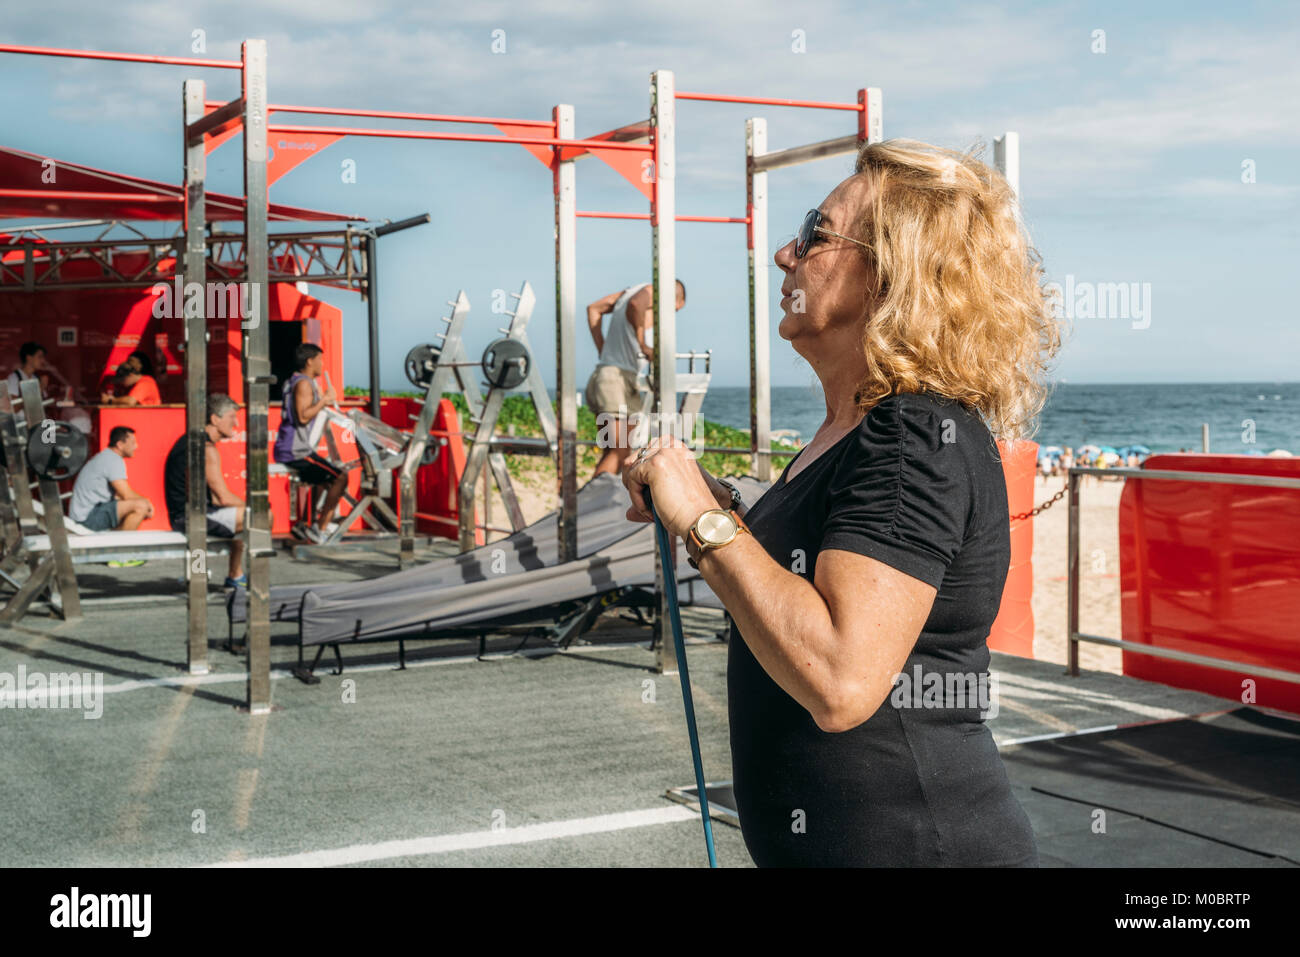 Model Released: Mature woman (70-75) exercising with a stretch cord at open air public gym in Ipanema Beach, Rio de Janeiro, Brazil Stock Photo